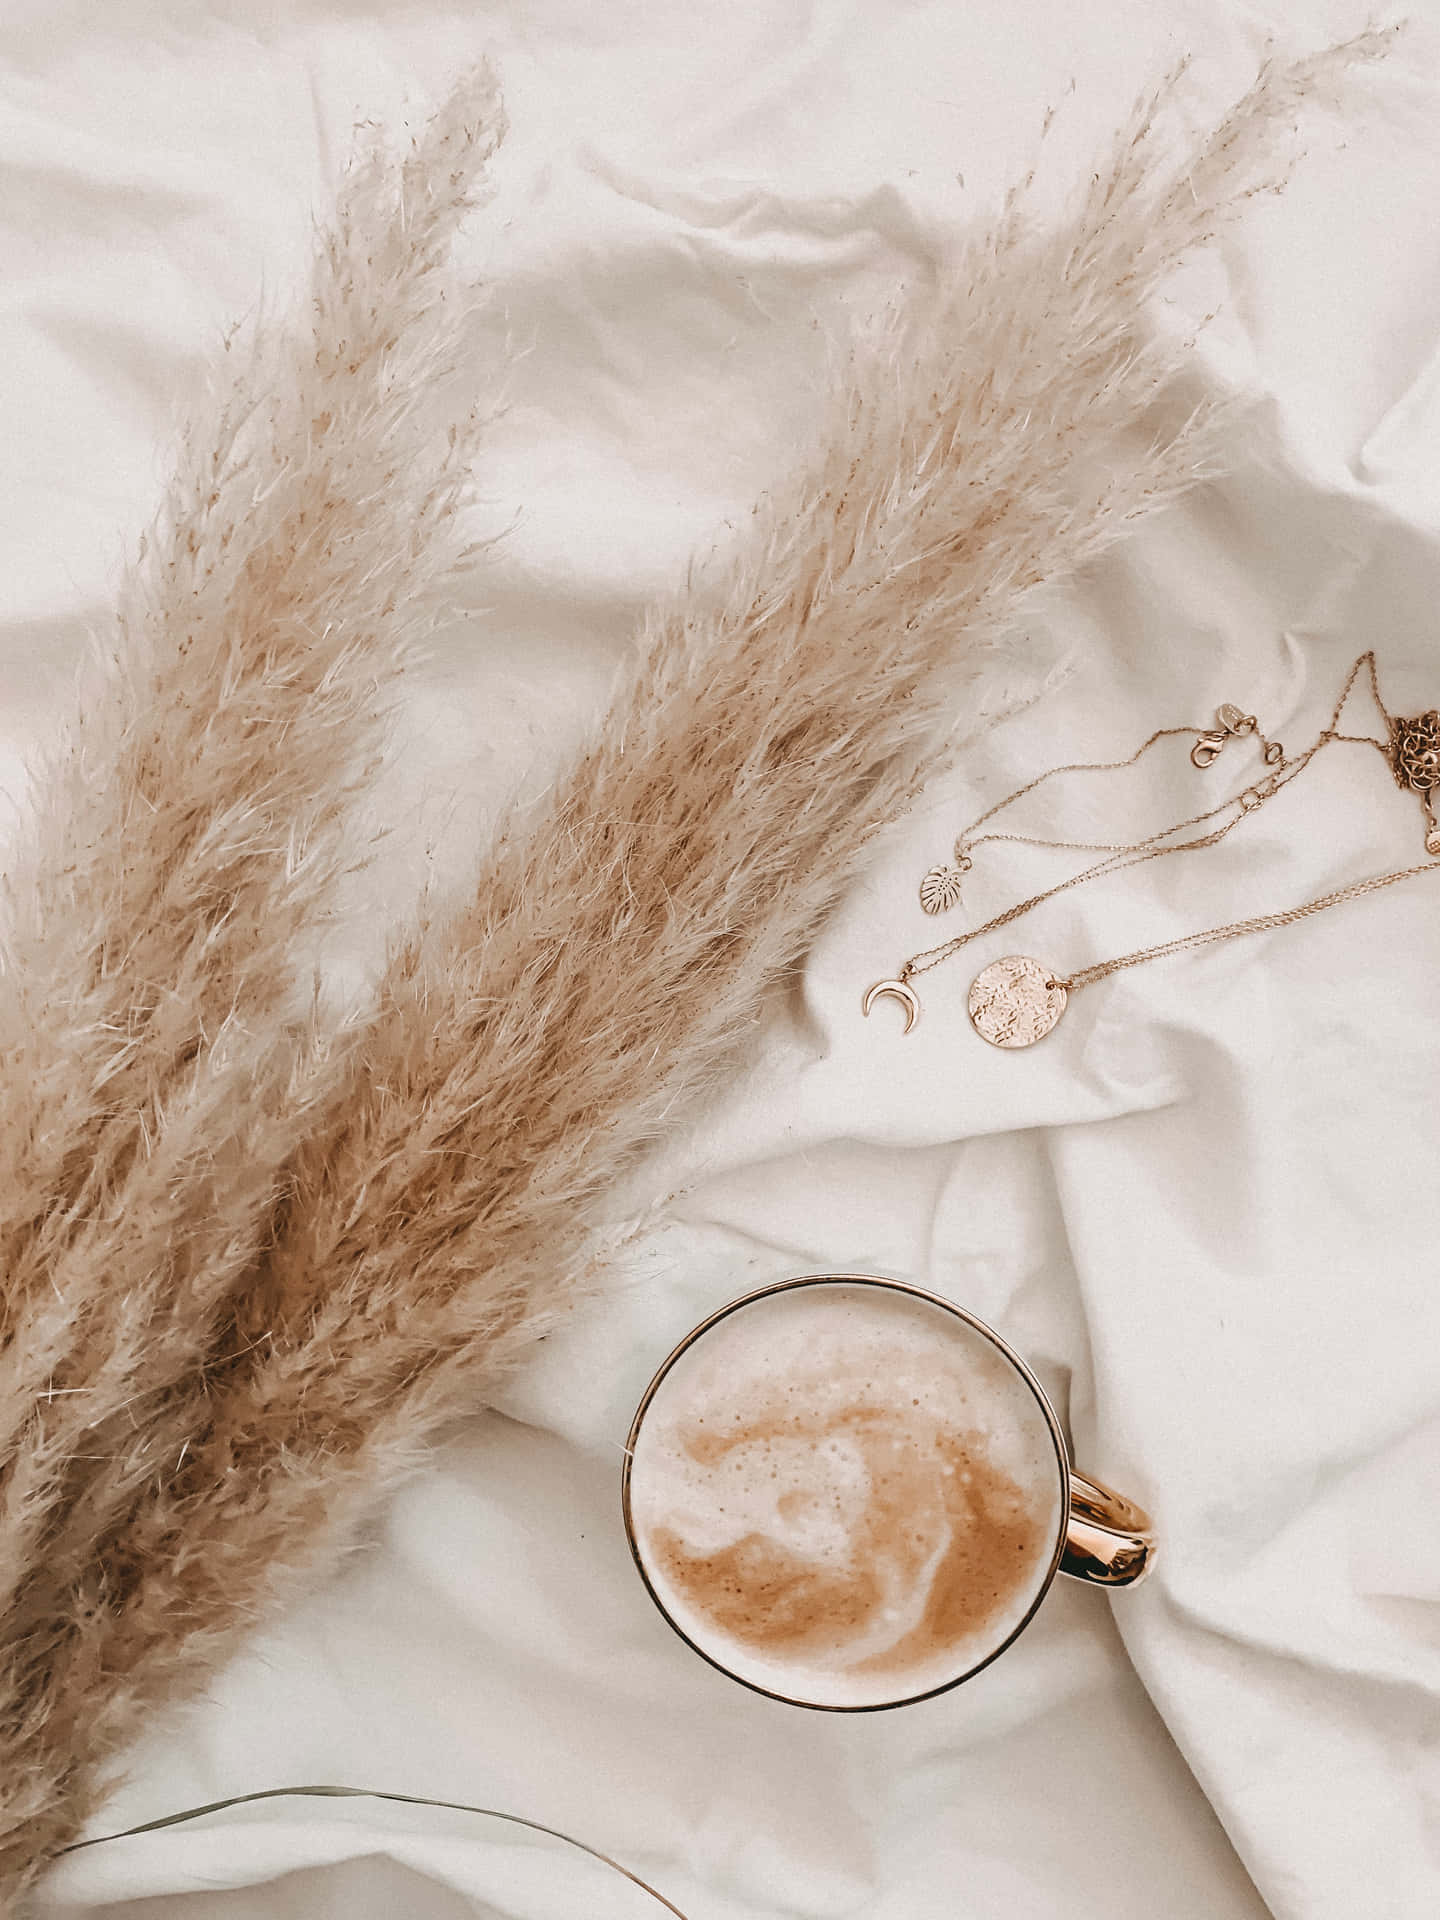 A Cup Of Coffee And A Necklace On A Bed